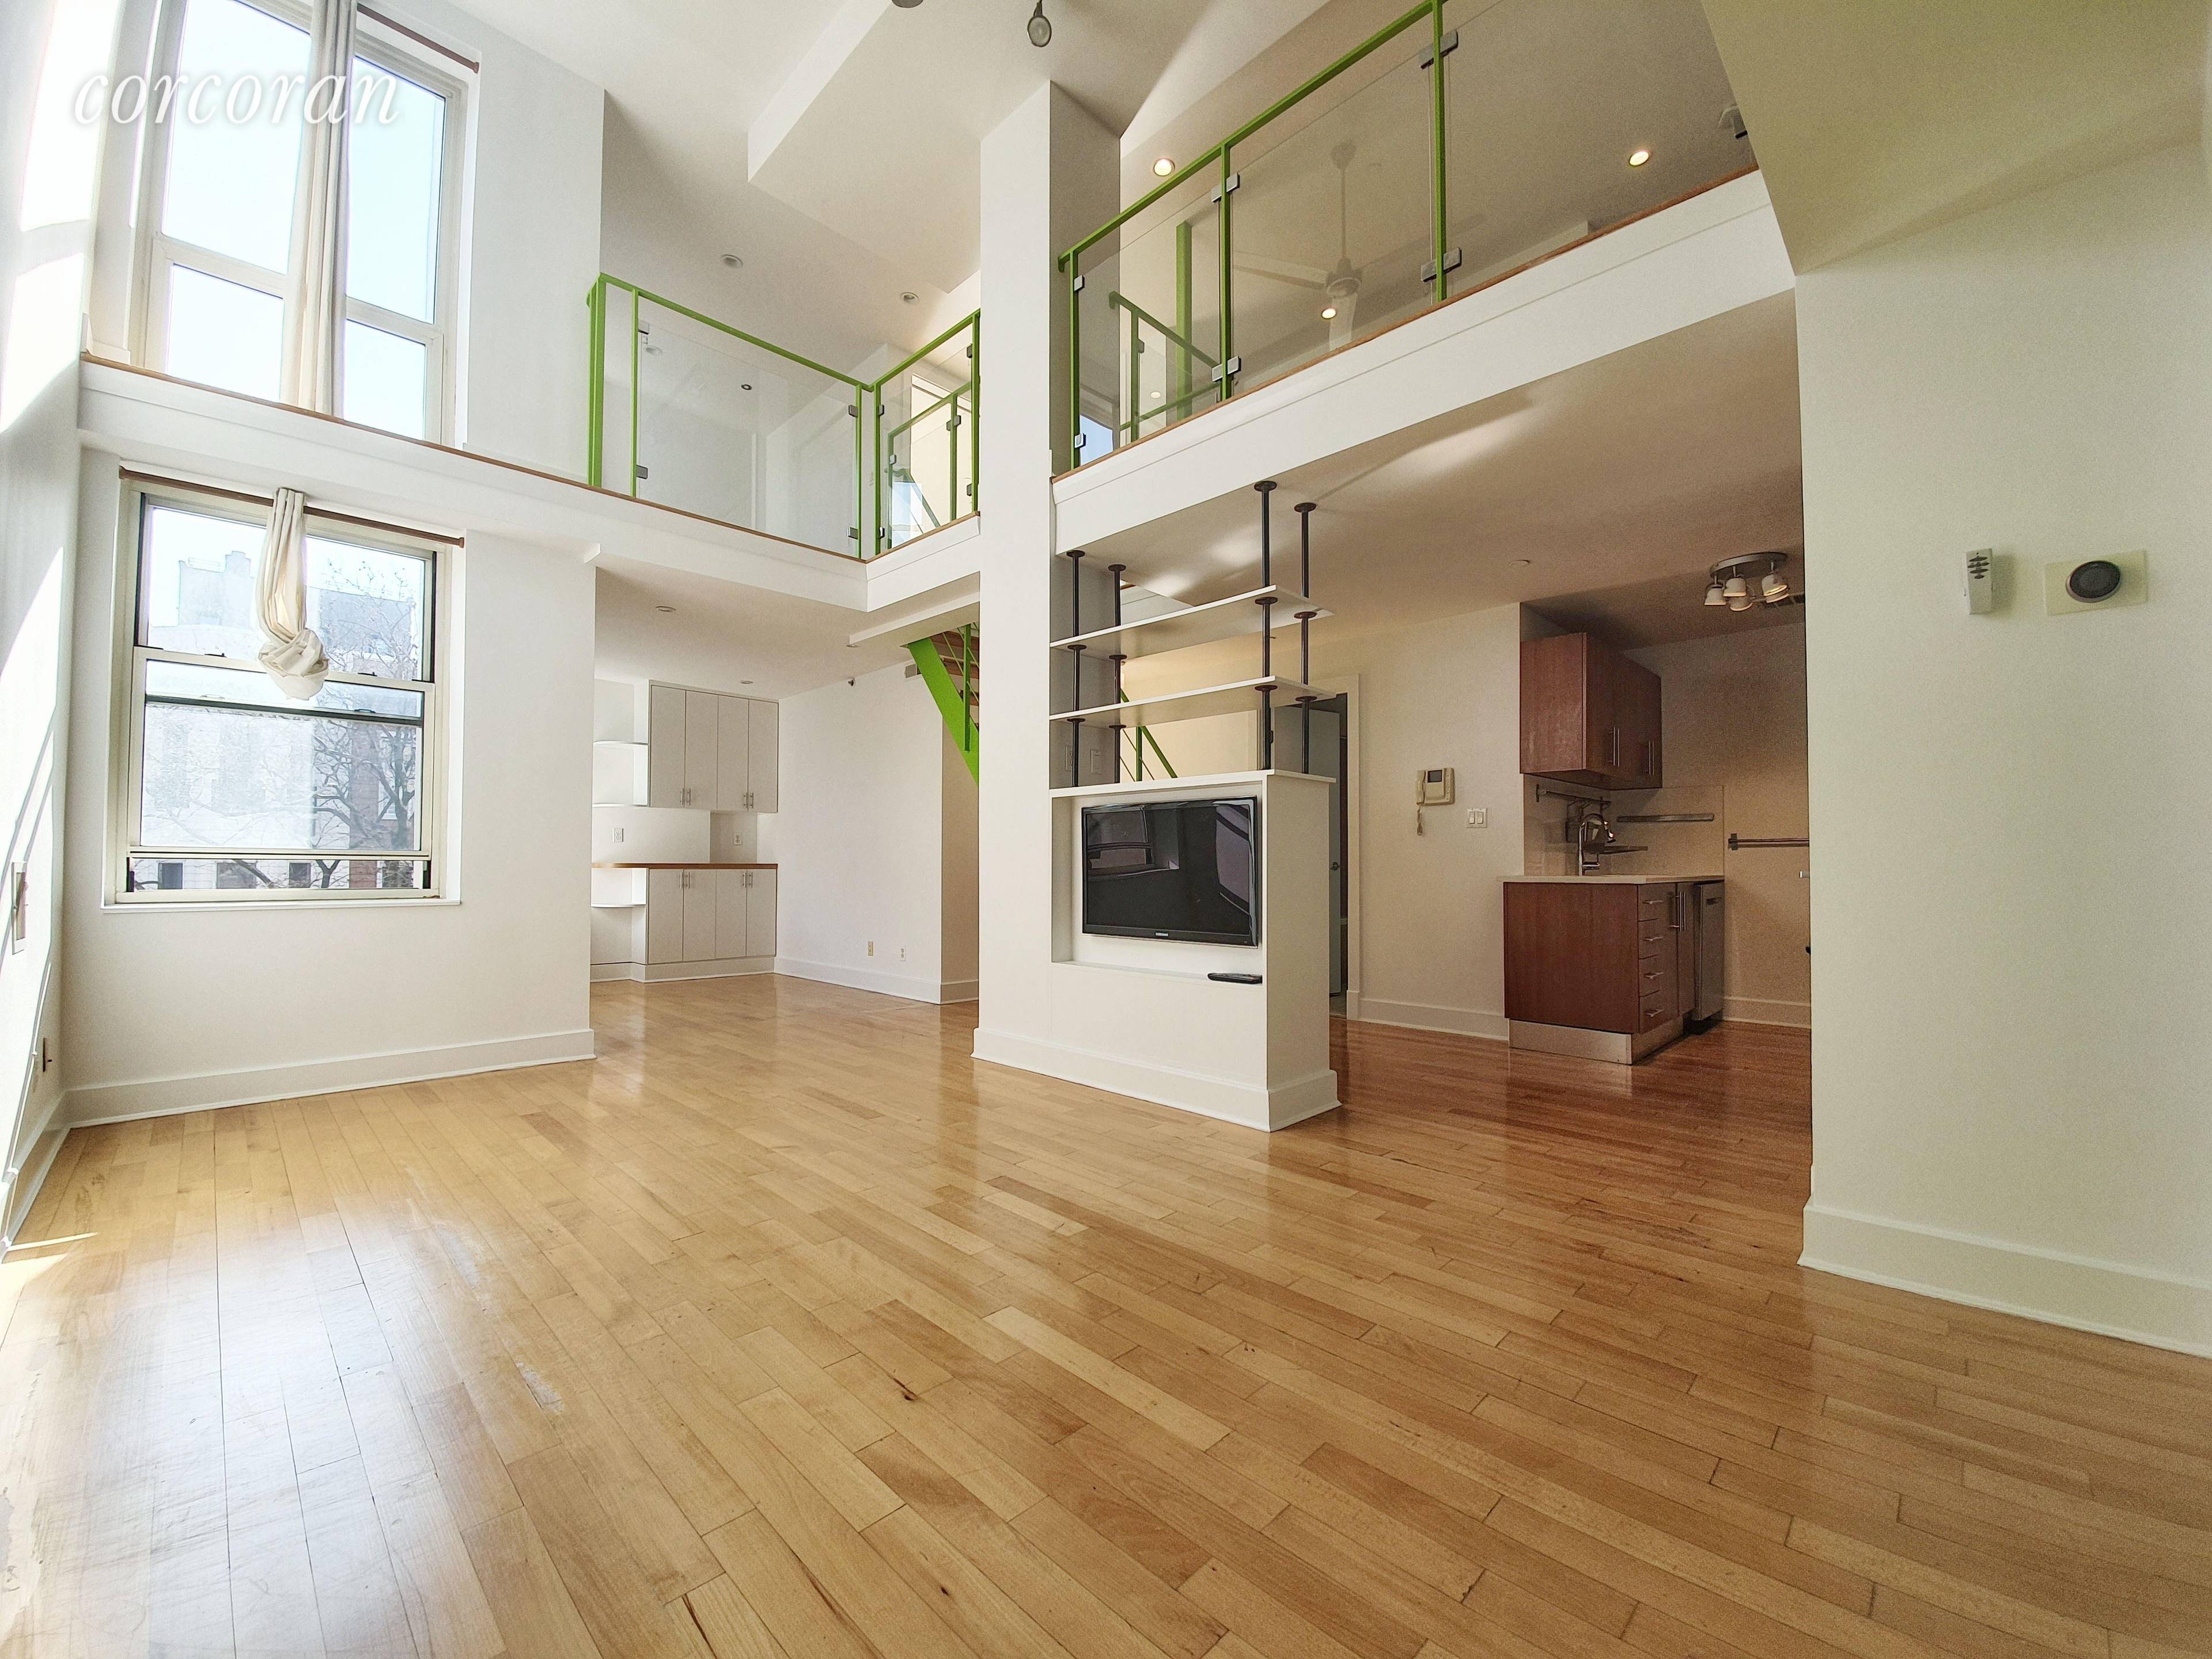 Gorgeous loft style condo nested in one of Williamsburg's most charming tree lined streets.